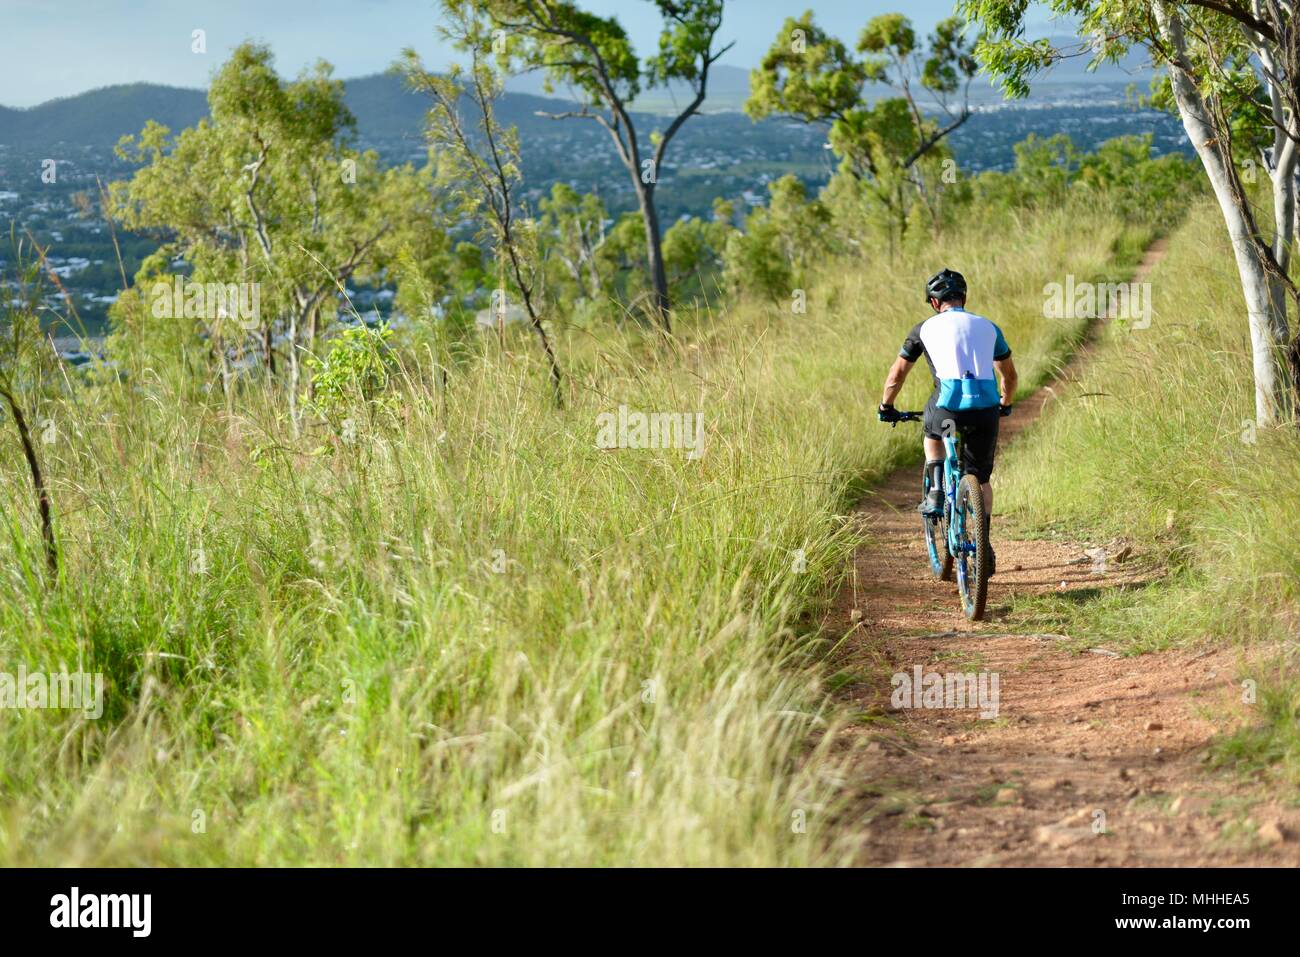 Male bicycle rider on a mountain bike going down a hill on a gravel track,  Mount Stuart hiking trails, Townsville, Queensland, Australia Stock Photo